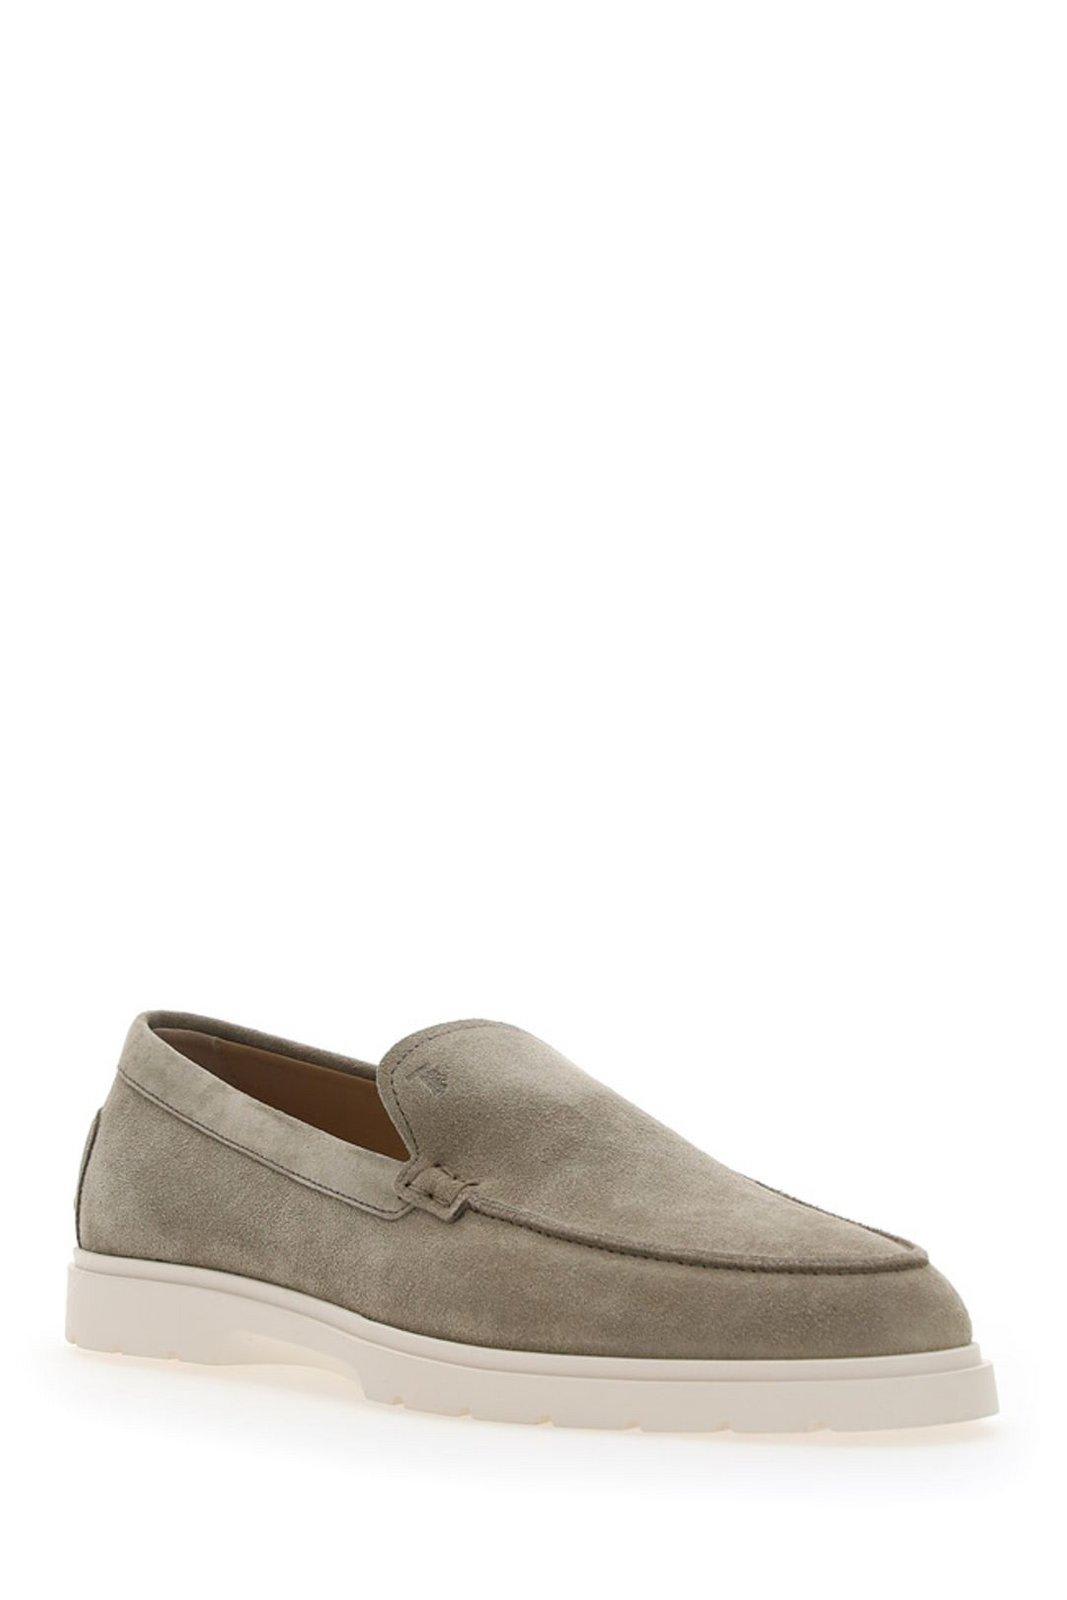 Shop Tod's Pointed Toe Loafers